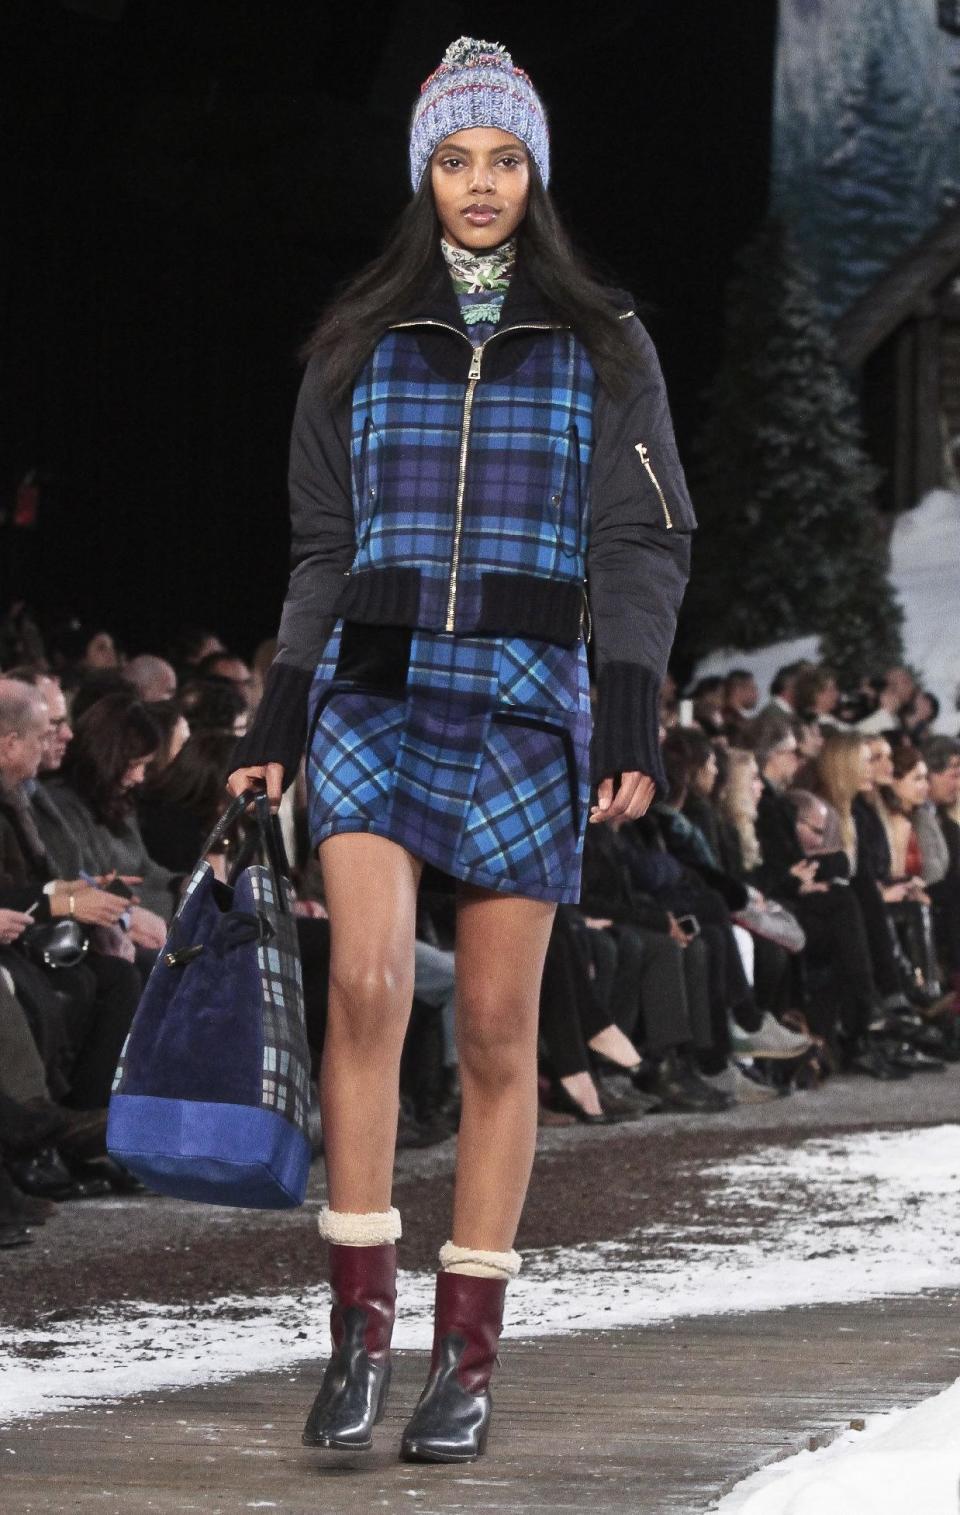 Fashion from the Tommy Hilfiger Fall 2014 collection is modeled during New York Fashion Week on Monday Feb. 10, 2014. (AP Photo/Bebeto Matthews)